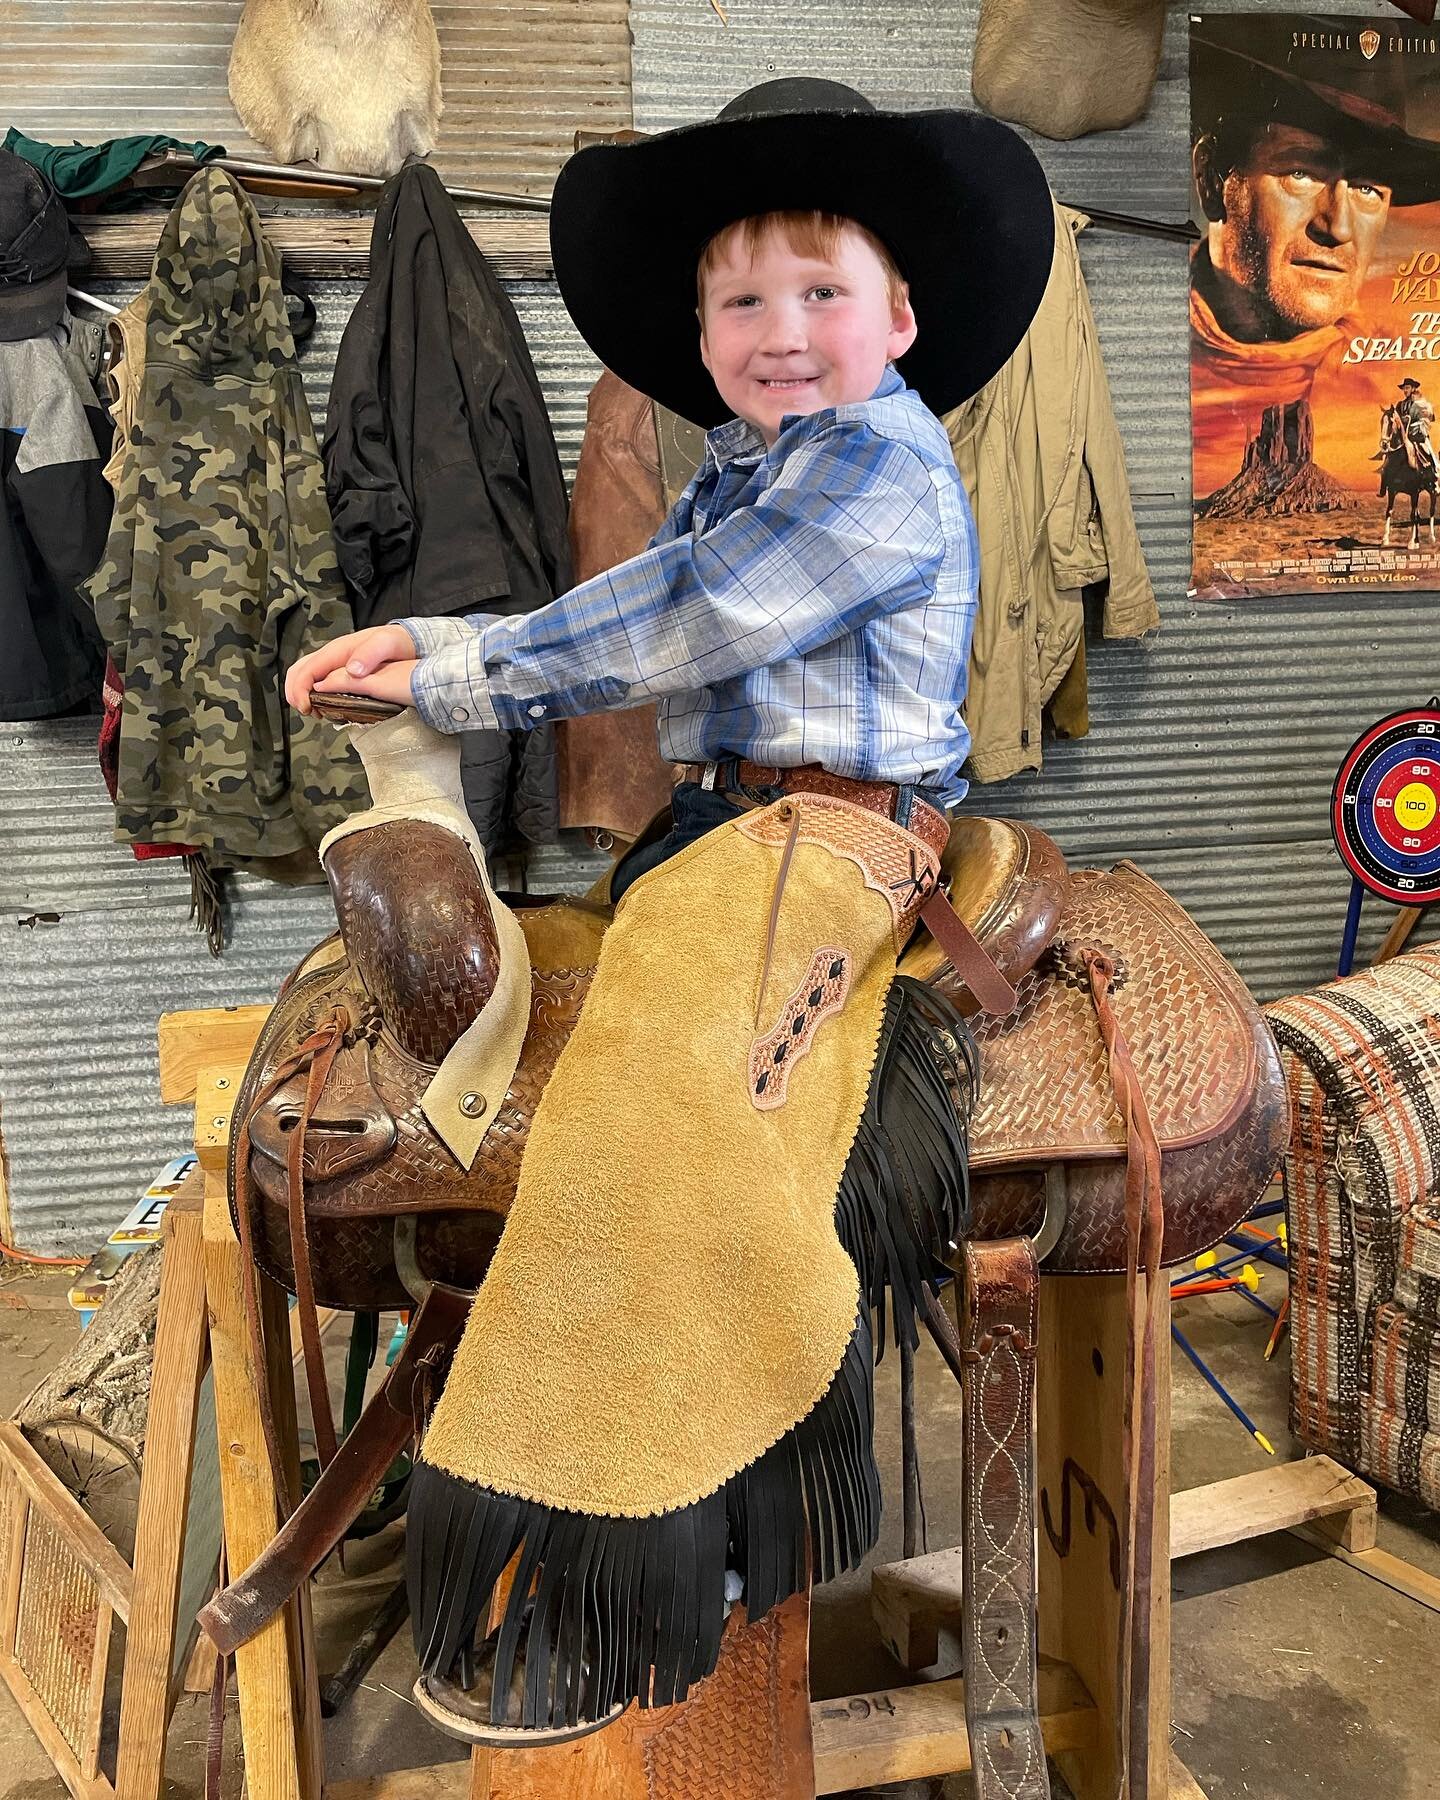 Lil Red had been pestering me for some new chaps, well when a fella turns 5 I suppose that&rsquo;s the least I can do. Happy Birthday pard